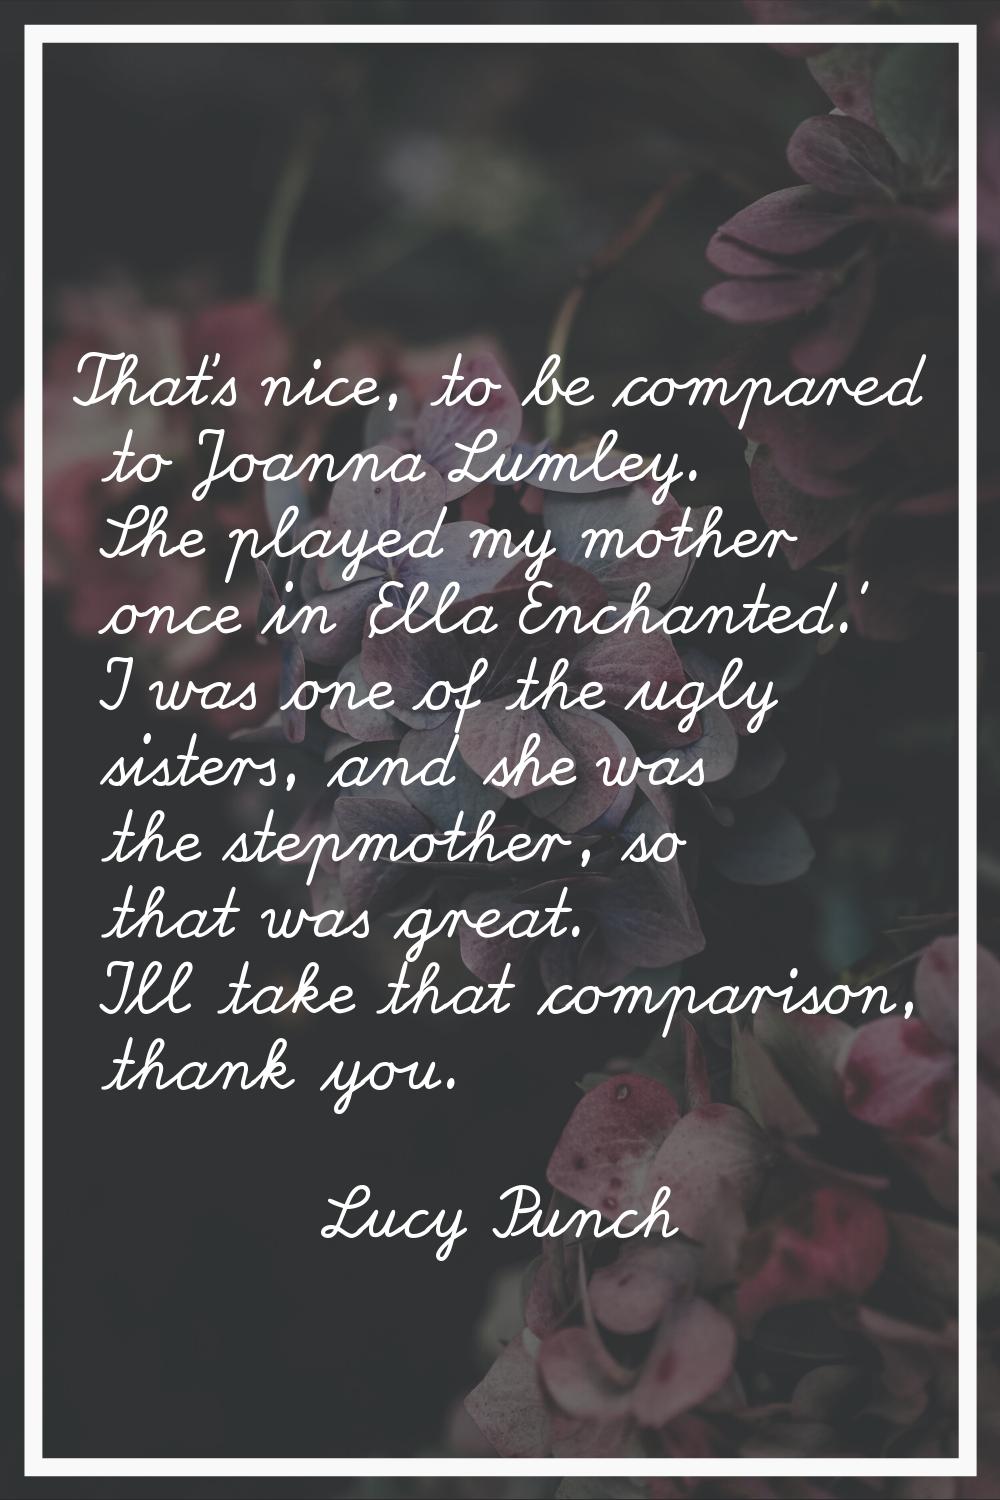 That's nice, to be compared to Joanna Lumley. She played my mother once in 'Ella Enchanted.' I was 